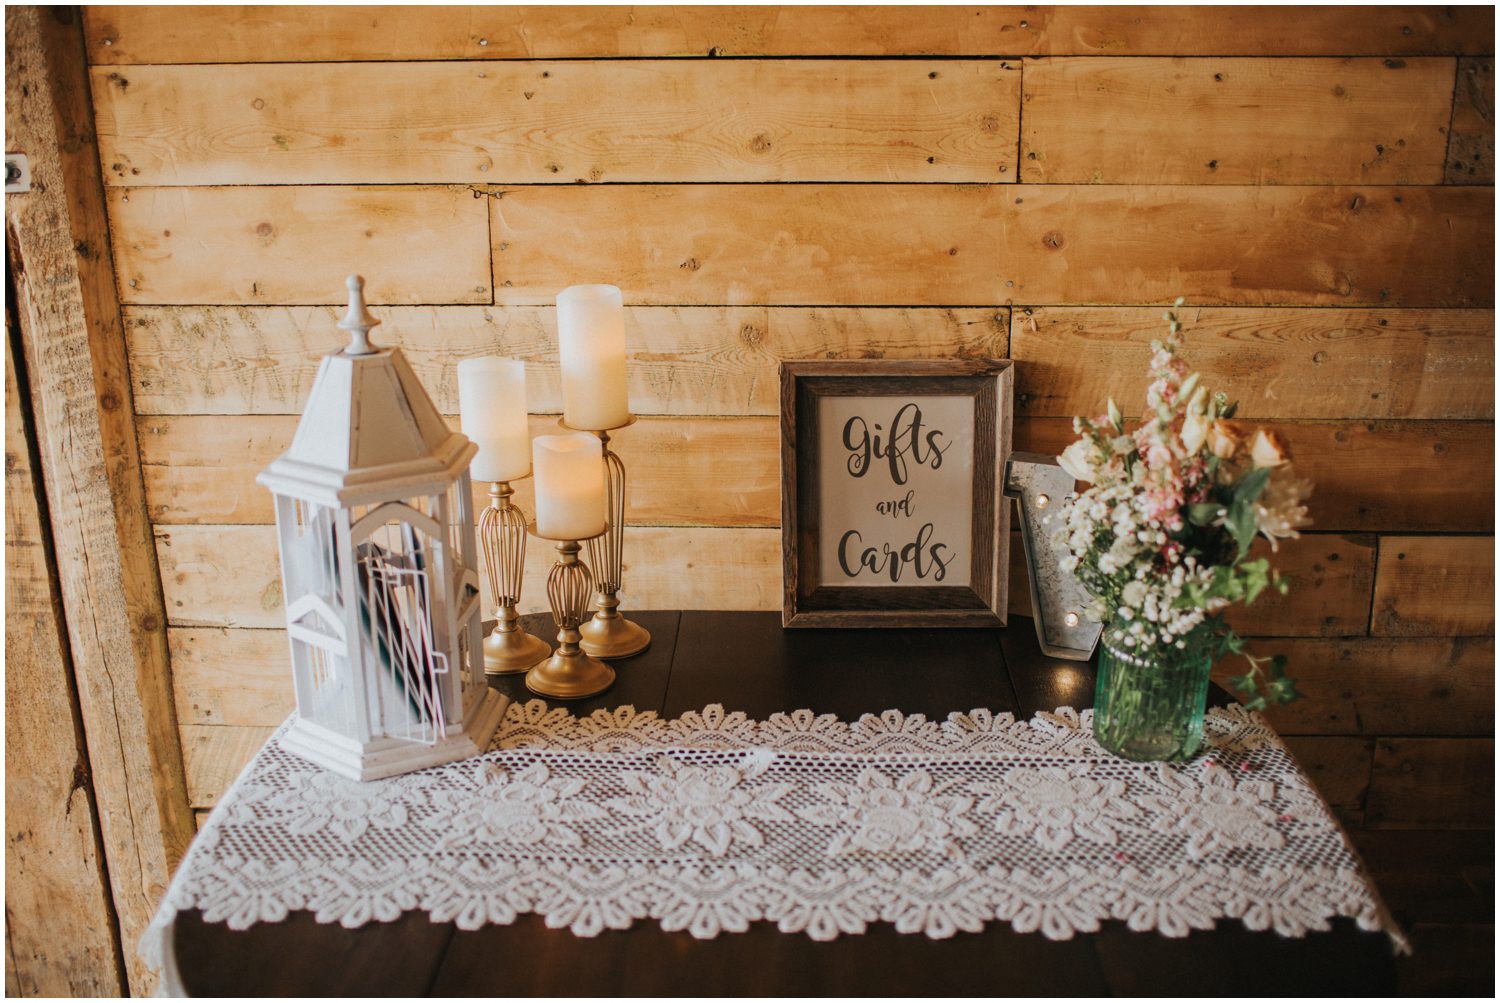 Gift and Card Table for wedding, Lantern wedding decorations, Double A Barn Wedding Photos, Double A Barn Grand Lake Colorado, AA Barn Grand Lake Colorado, Double A Barn Wedding Photos, Grand lake Wedding Photographer, Colorado Wedding Photographer, Boho Wedding inspiration, Rustic wedding inspiration, Vintage Wedding inspiration